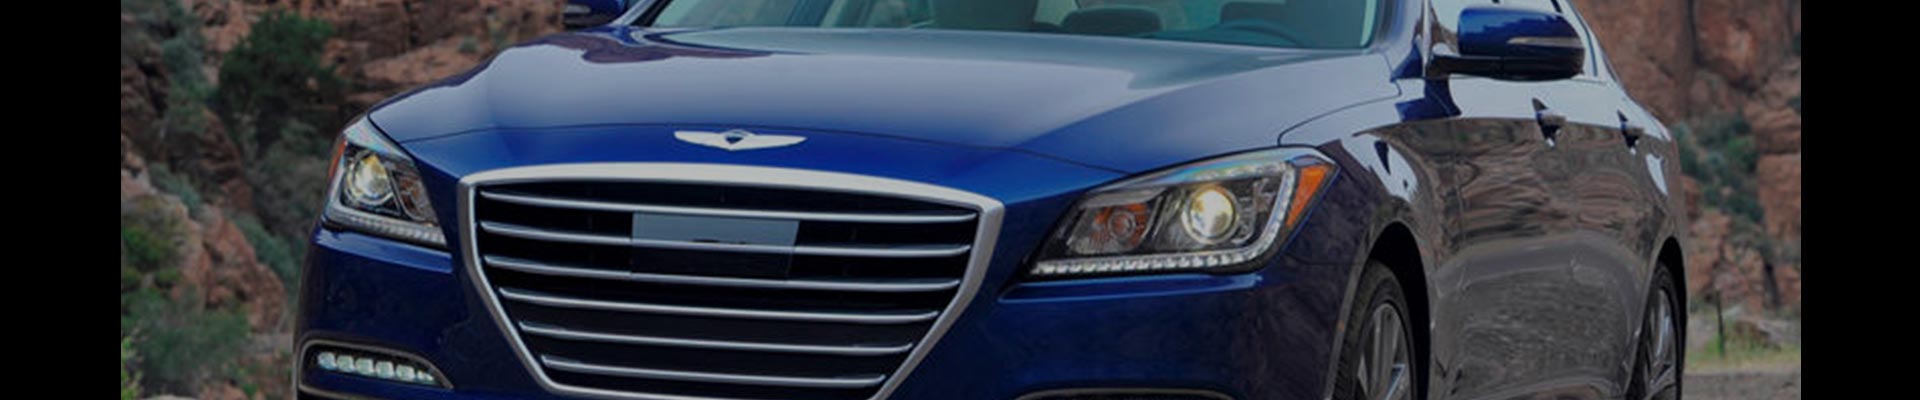 Shop Replacement and OEM 2013 Hyundai Genesis Parts with Discounted Price on the Net